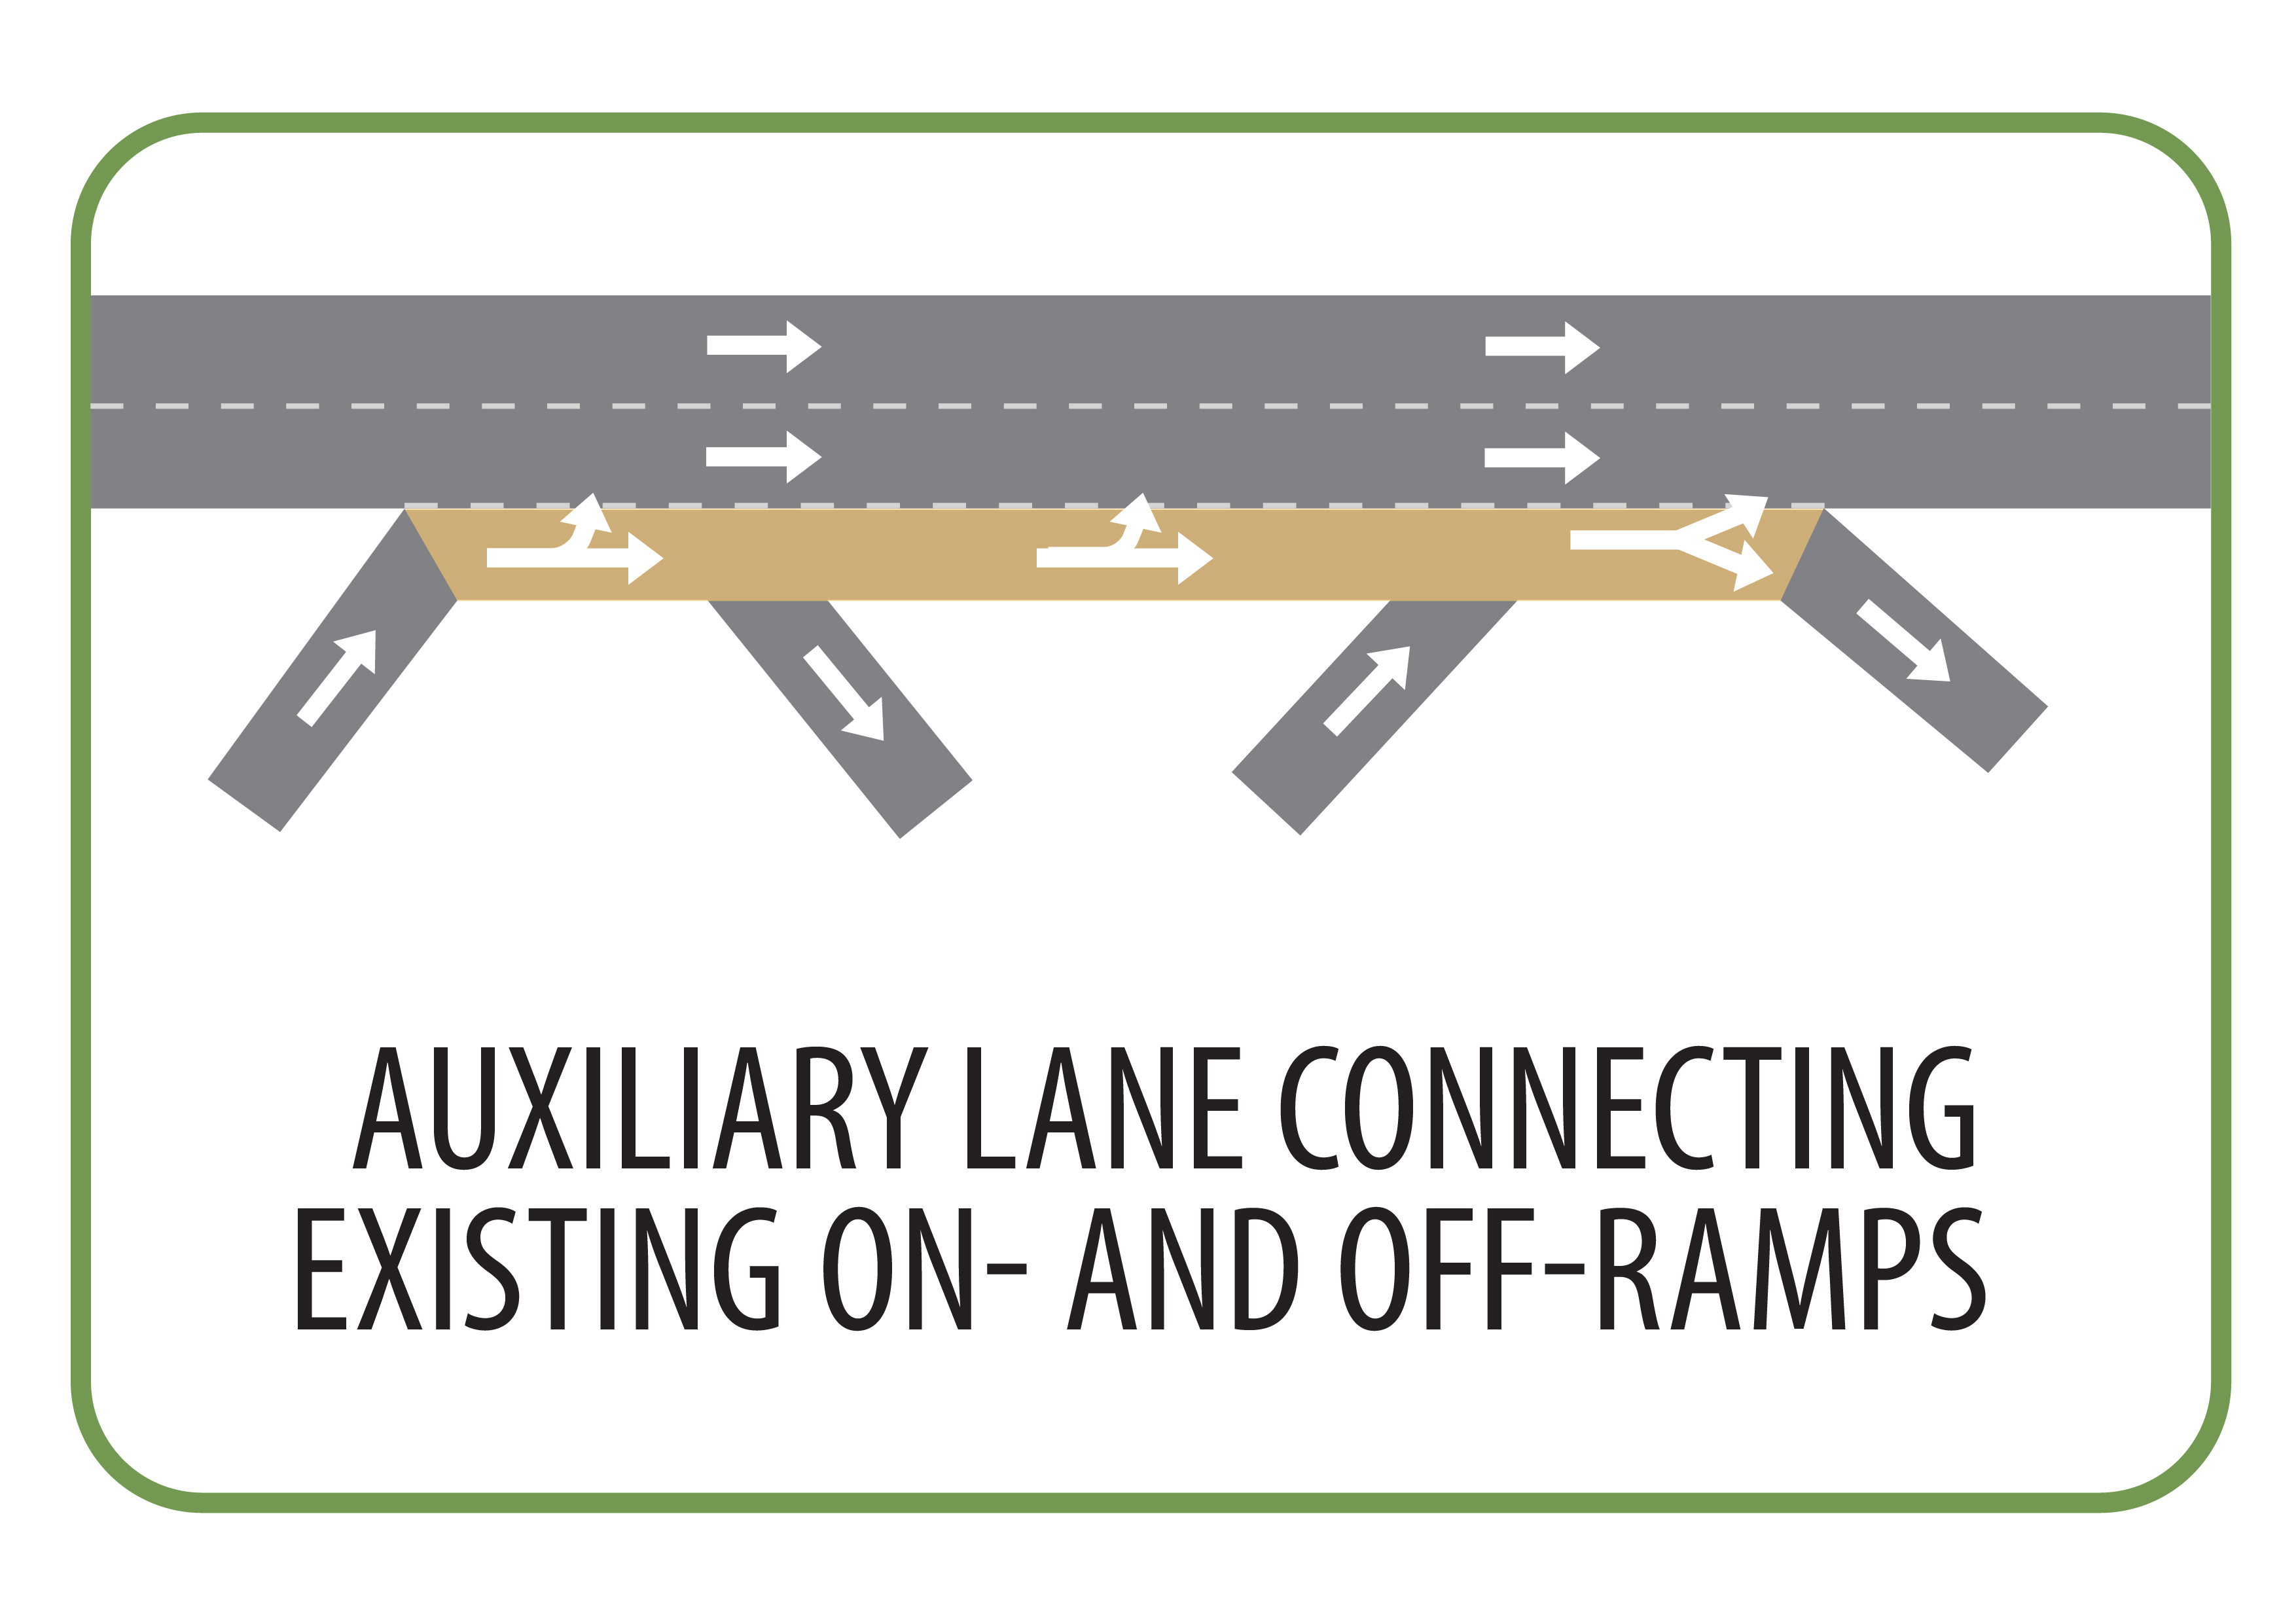 Highway with three lanes and several on-and off-ramps. Arrows indicate you can travel in the lane, merge into other lanes, or ex